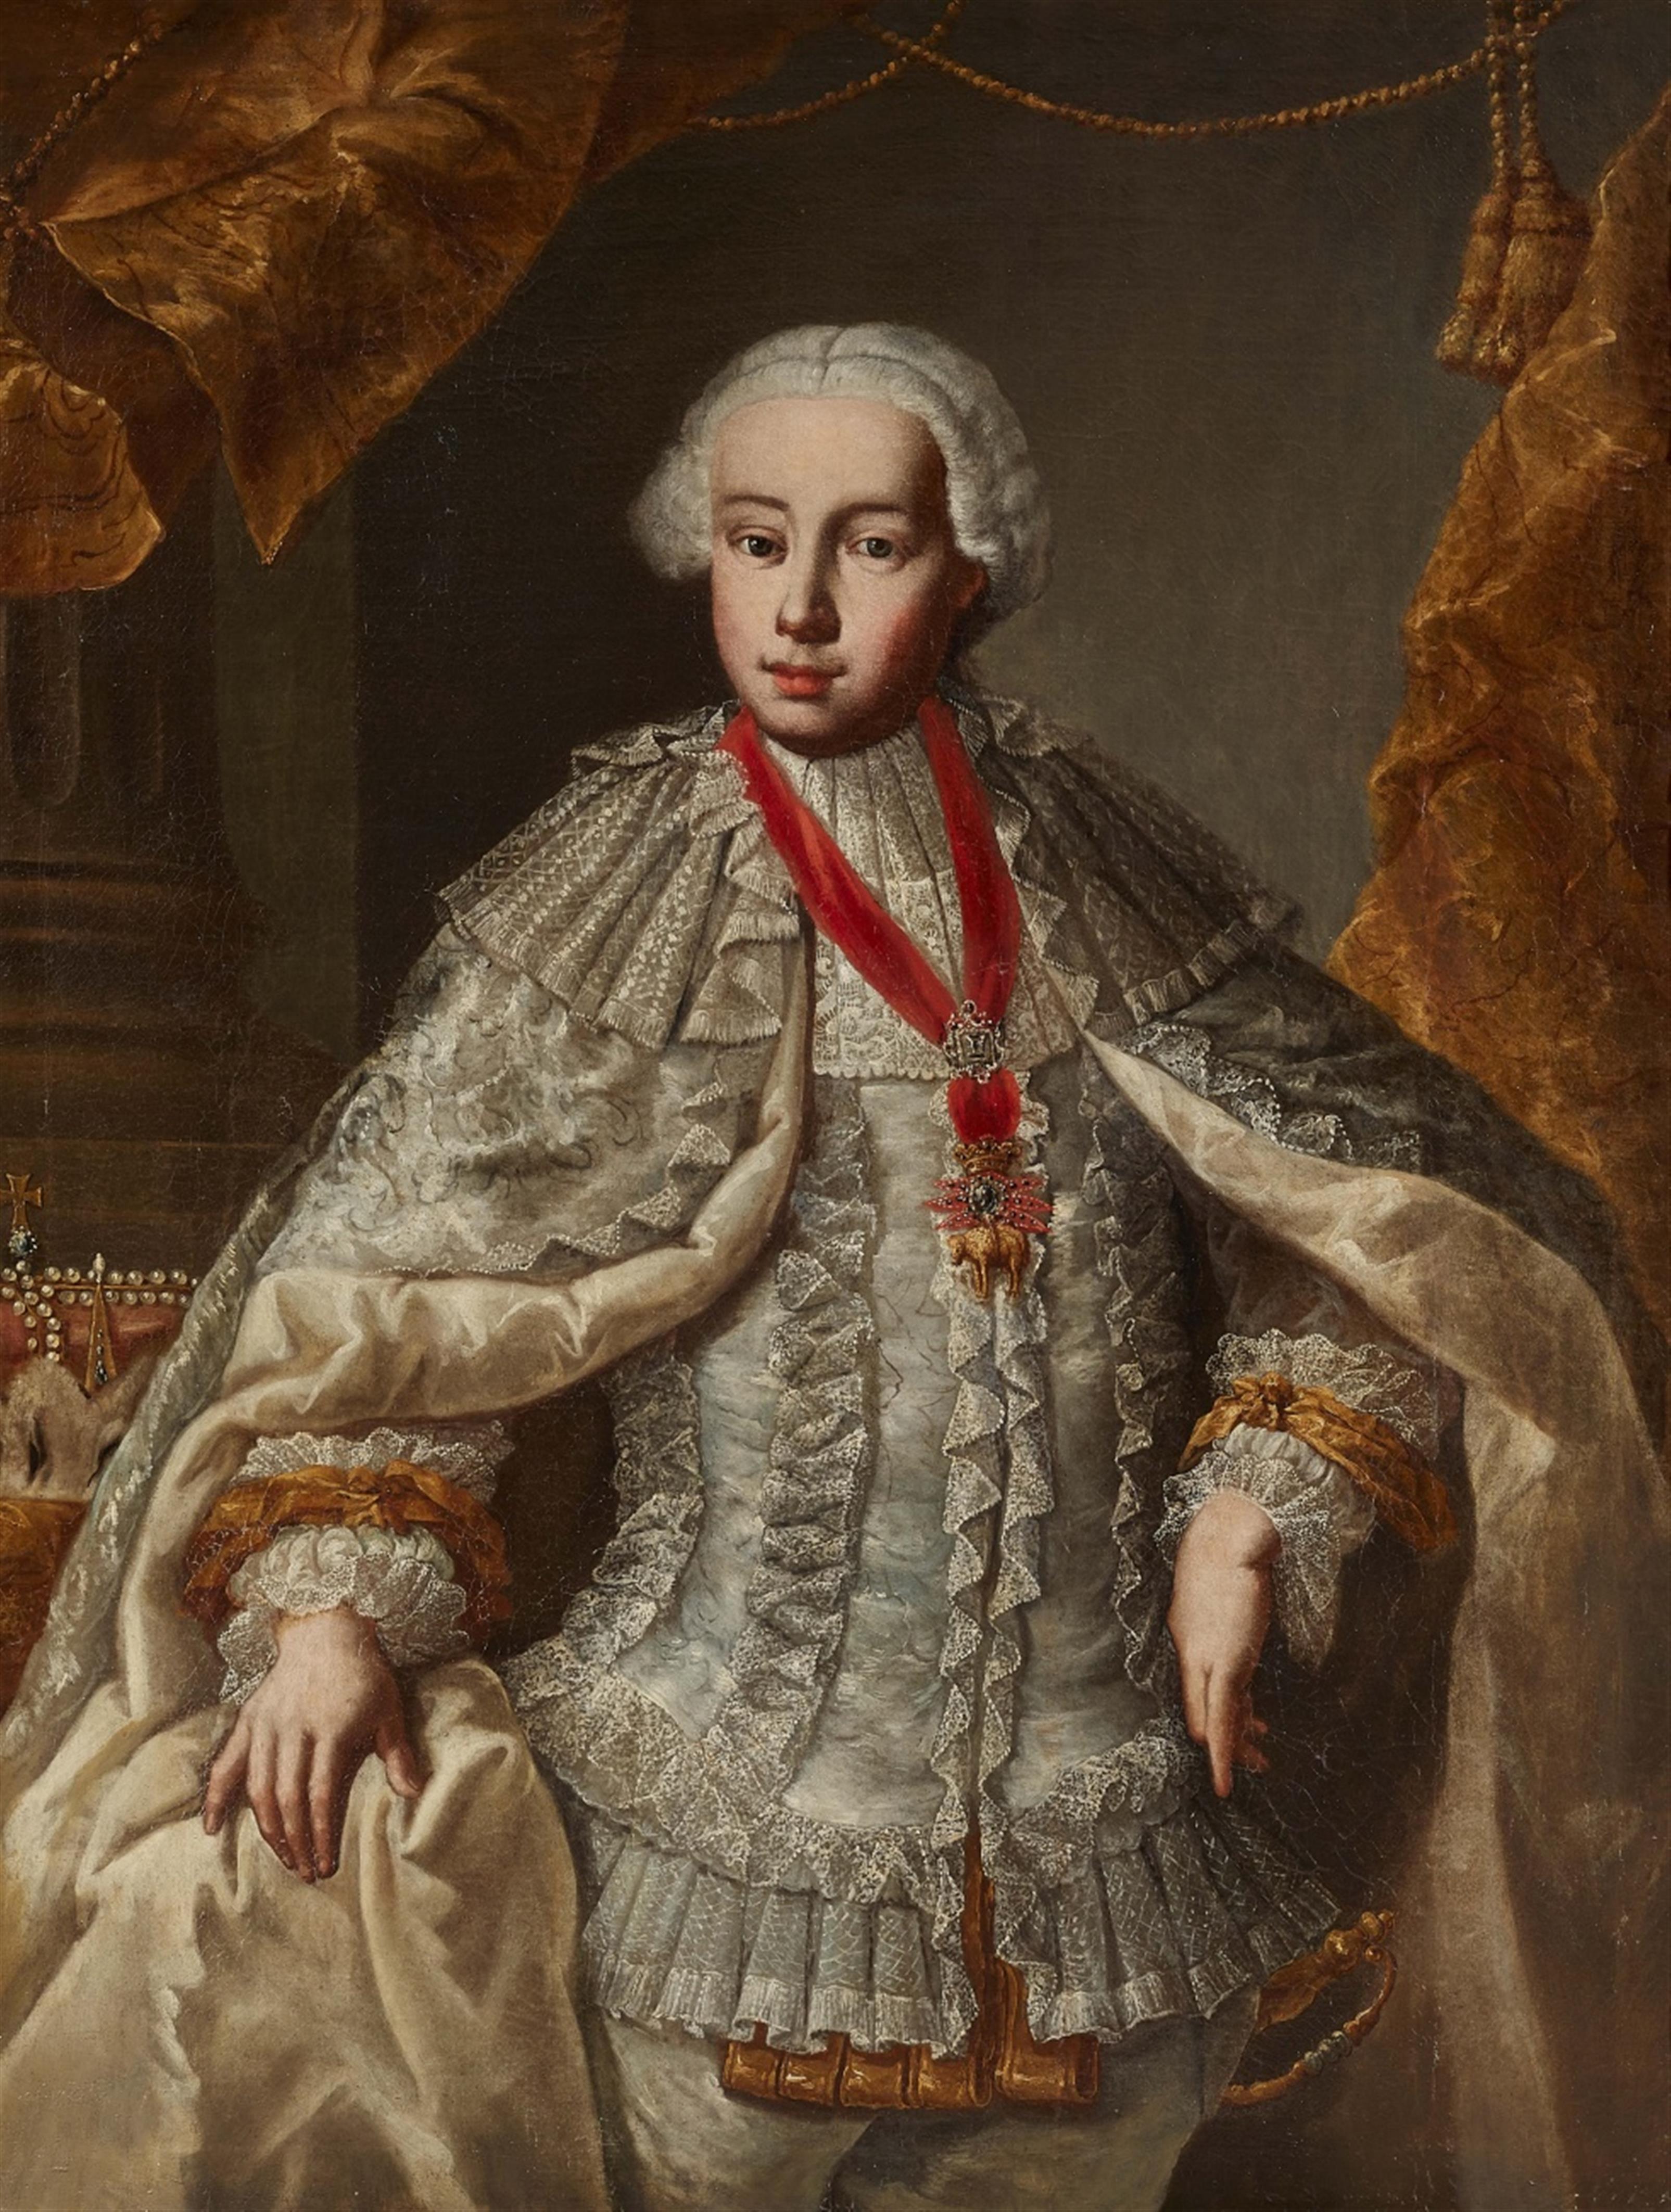 German School 18th century - Portrait of an Austrian Archduke with the Order of the Golden Fleece - image-1